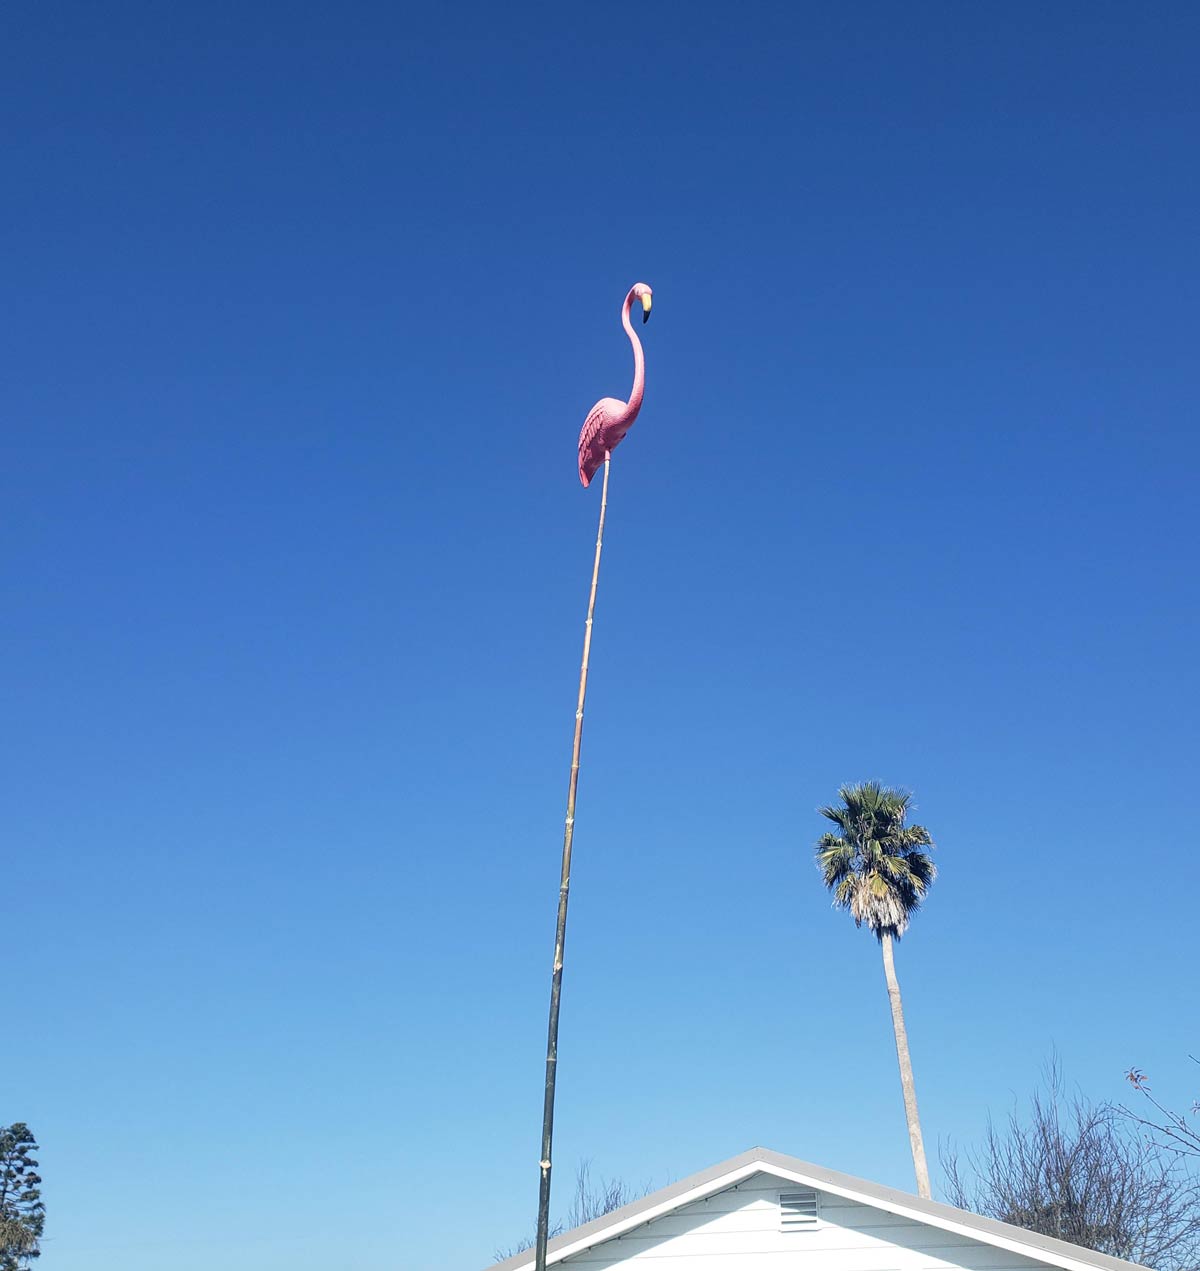 I asked my husband to get a new leg for the garden flamingo..